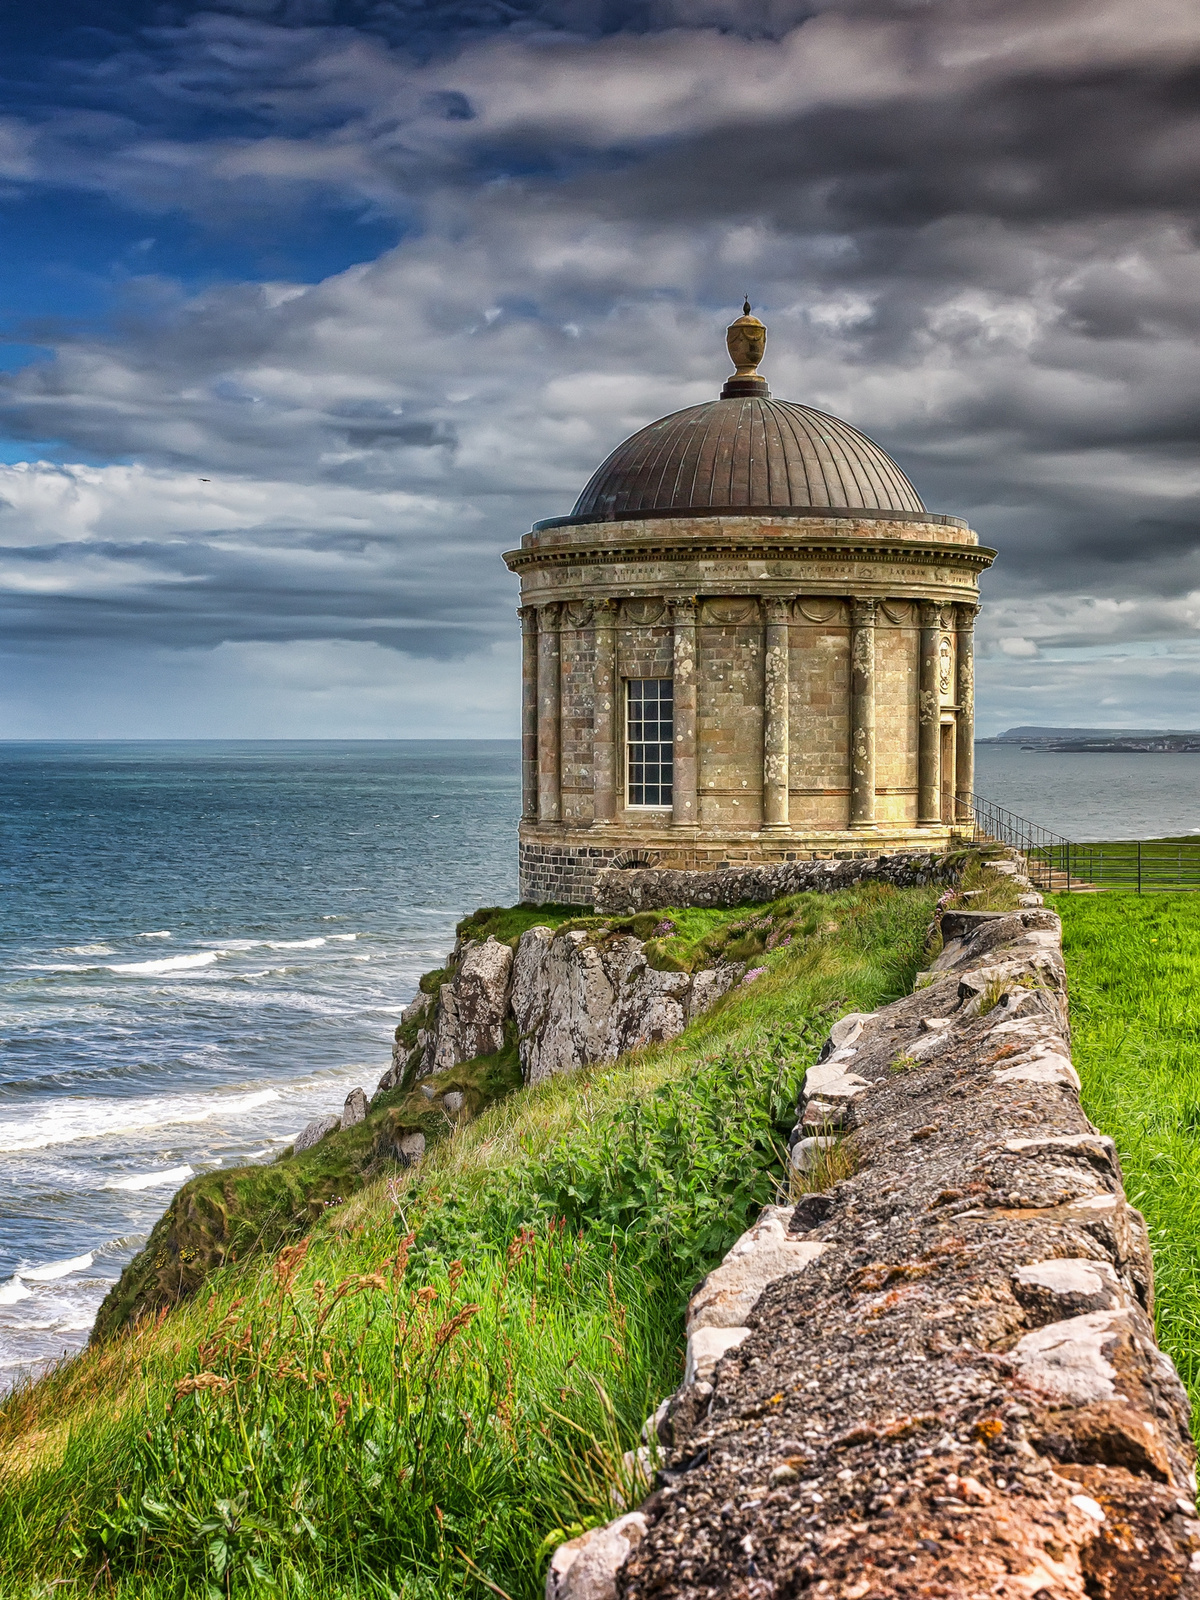 Mussenden Temple, Downhill